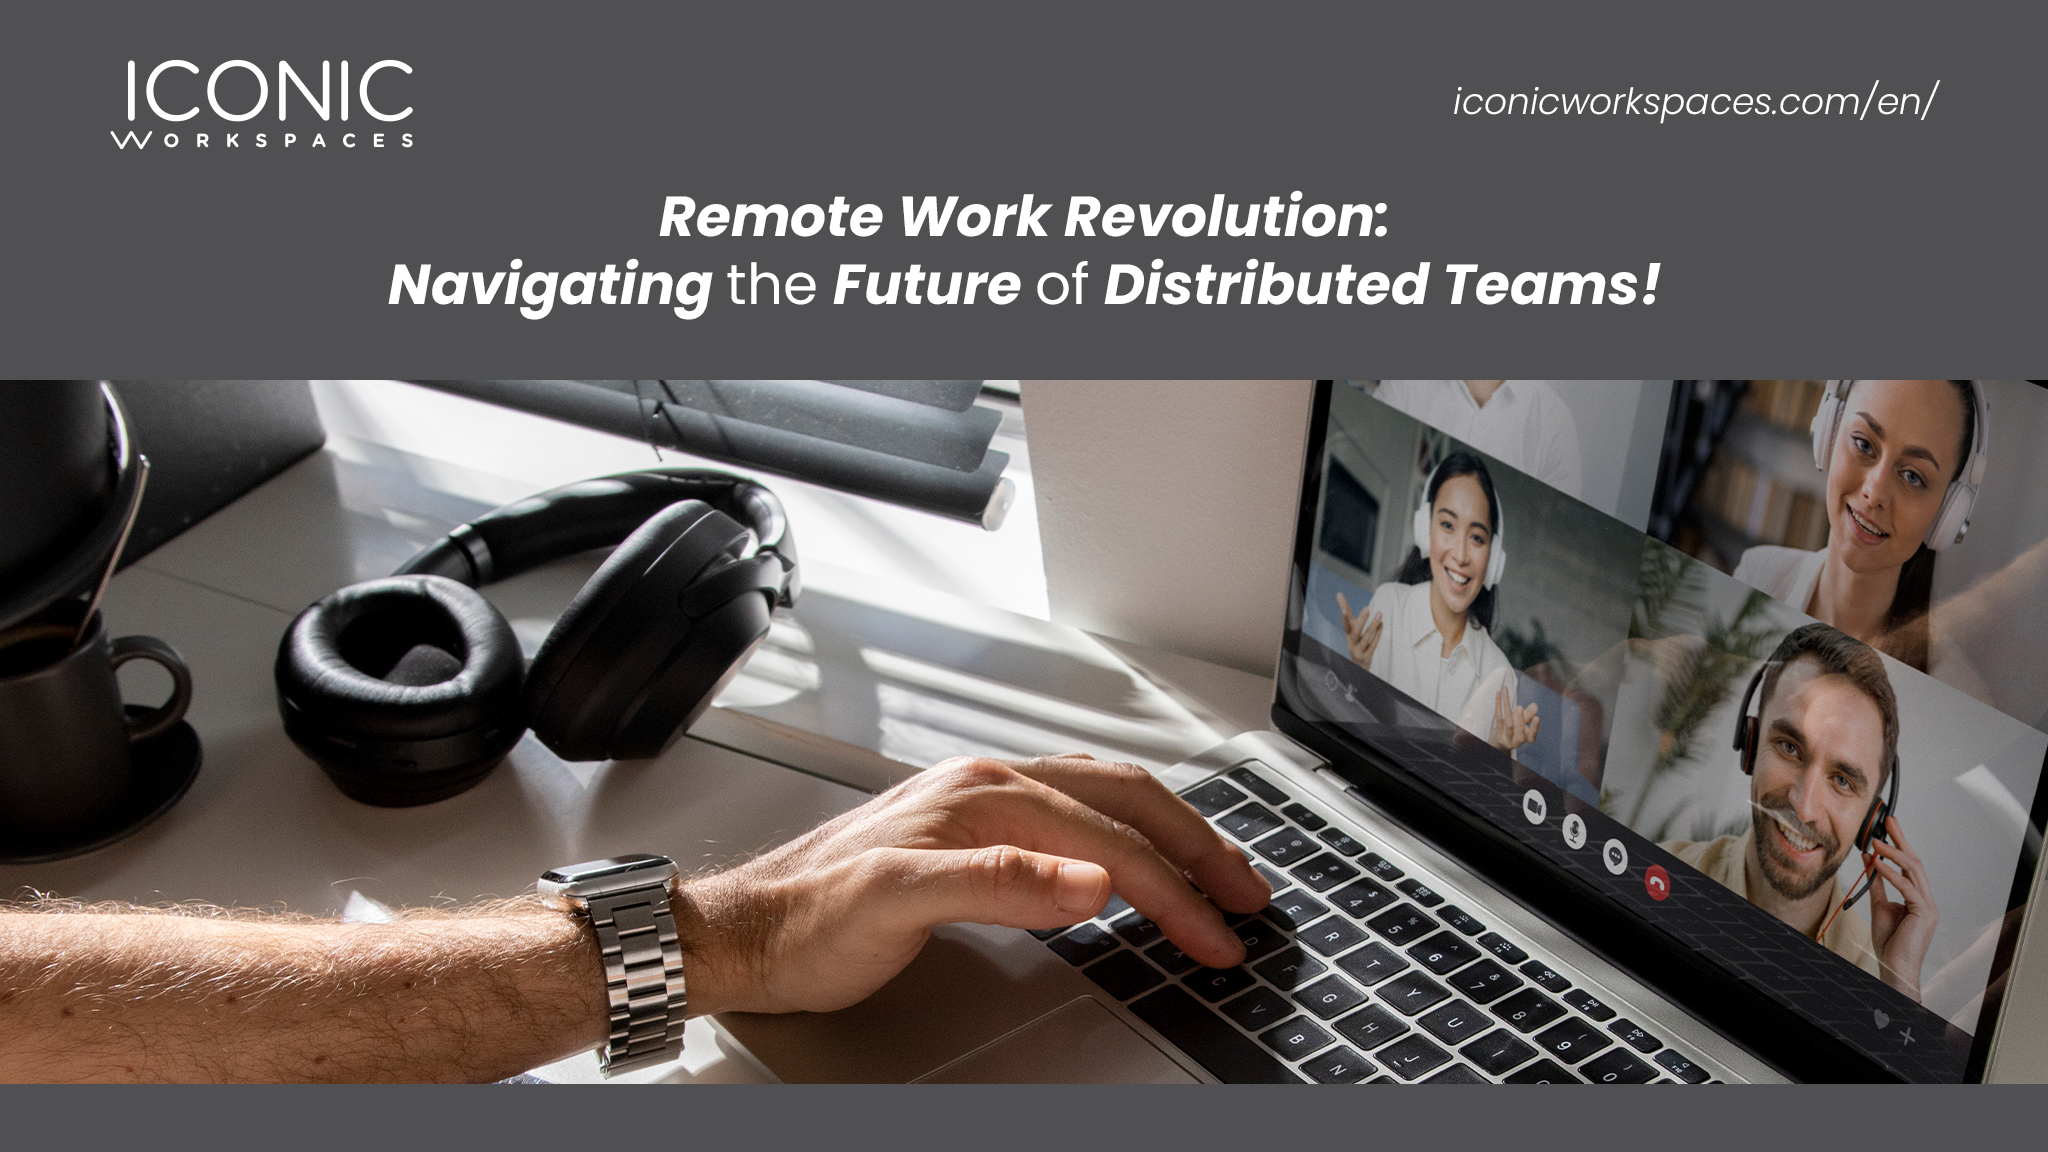 Remote Work Revolution: Navigating the Future of Distributed Teams